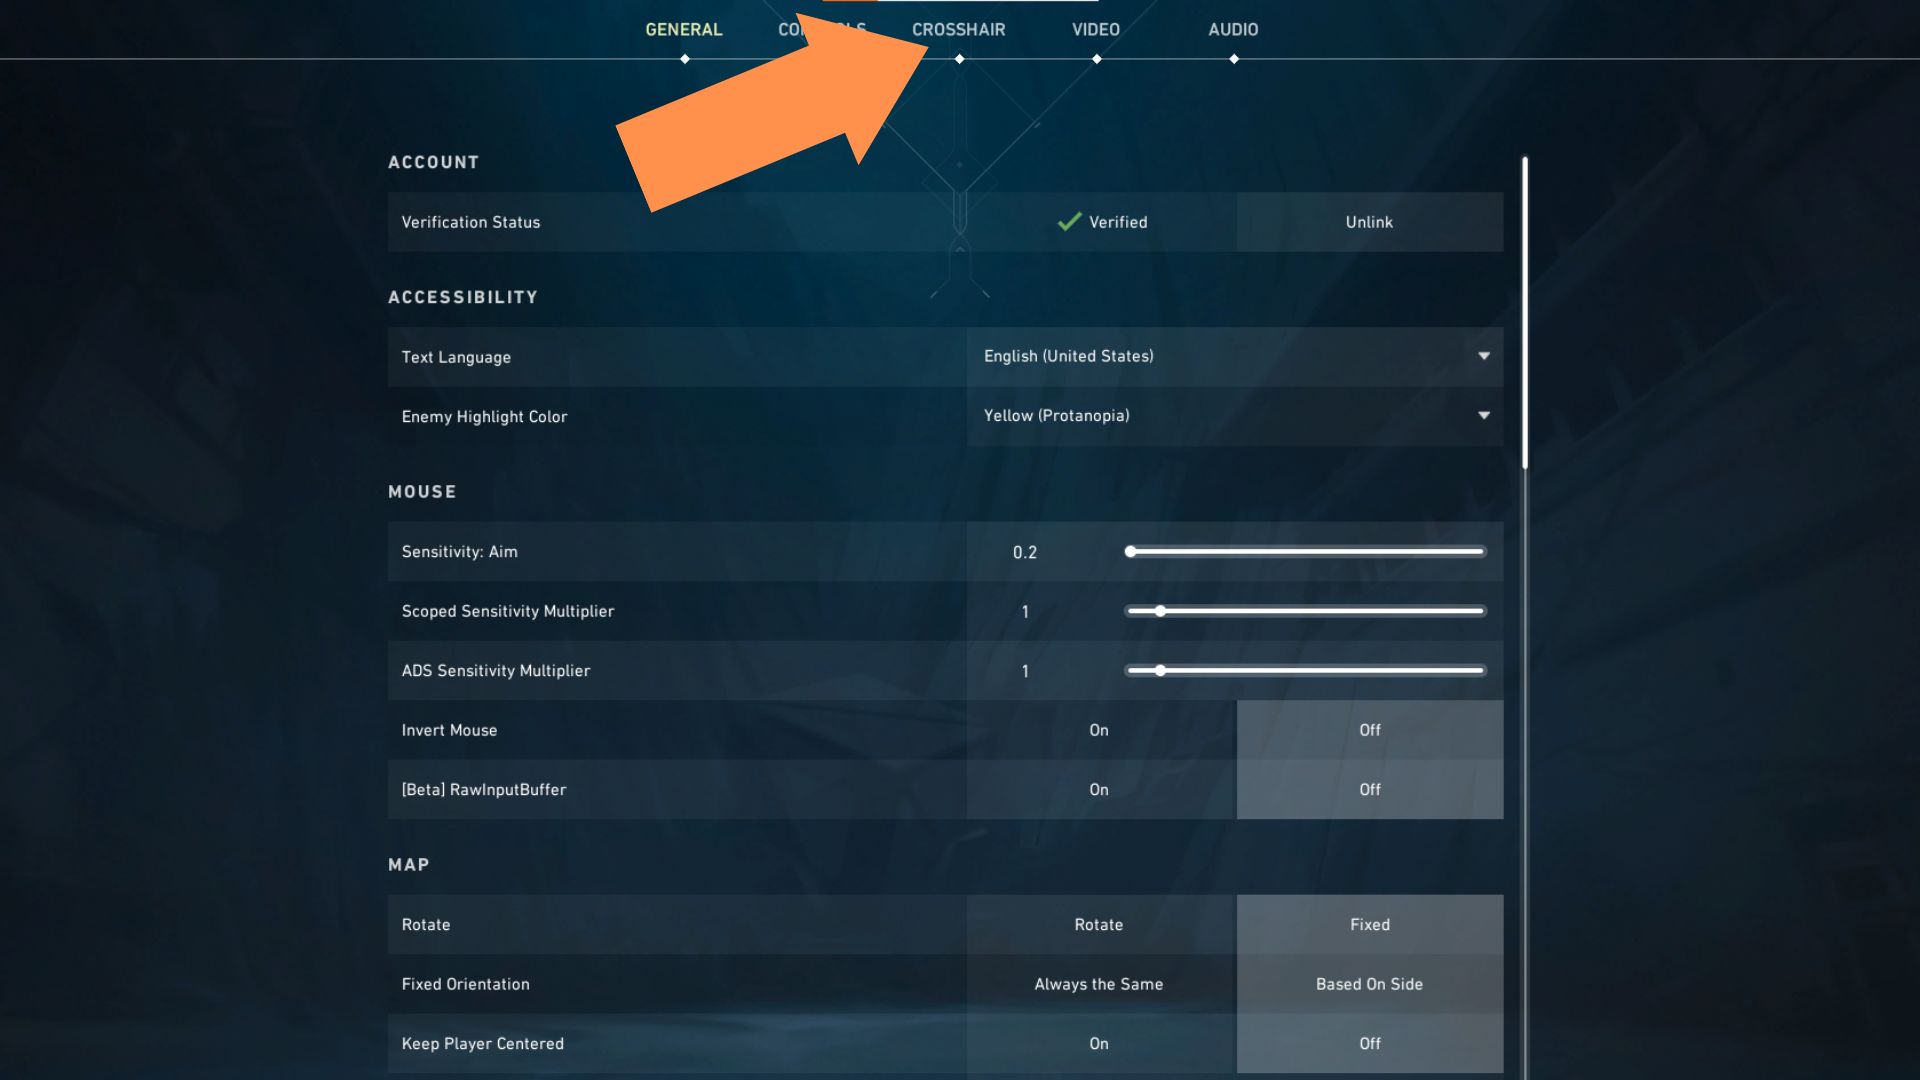 A screenshot showing the Crosshair tab in the Settings menu in Valorant